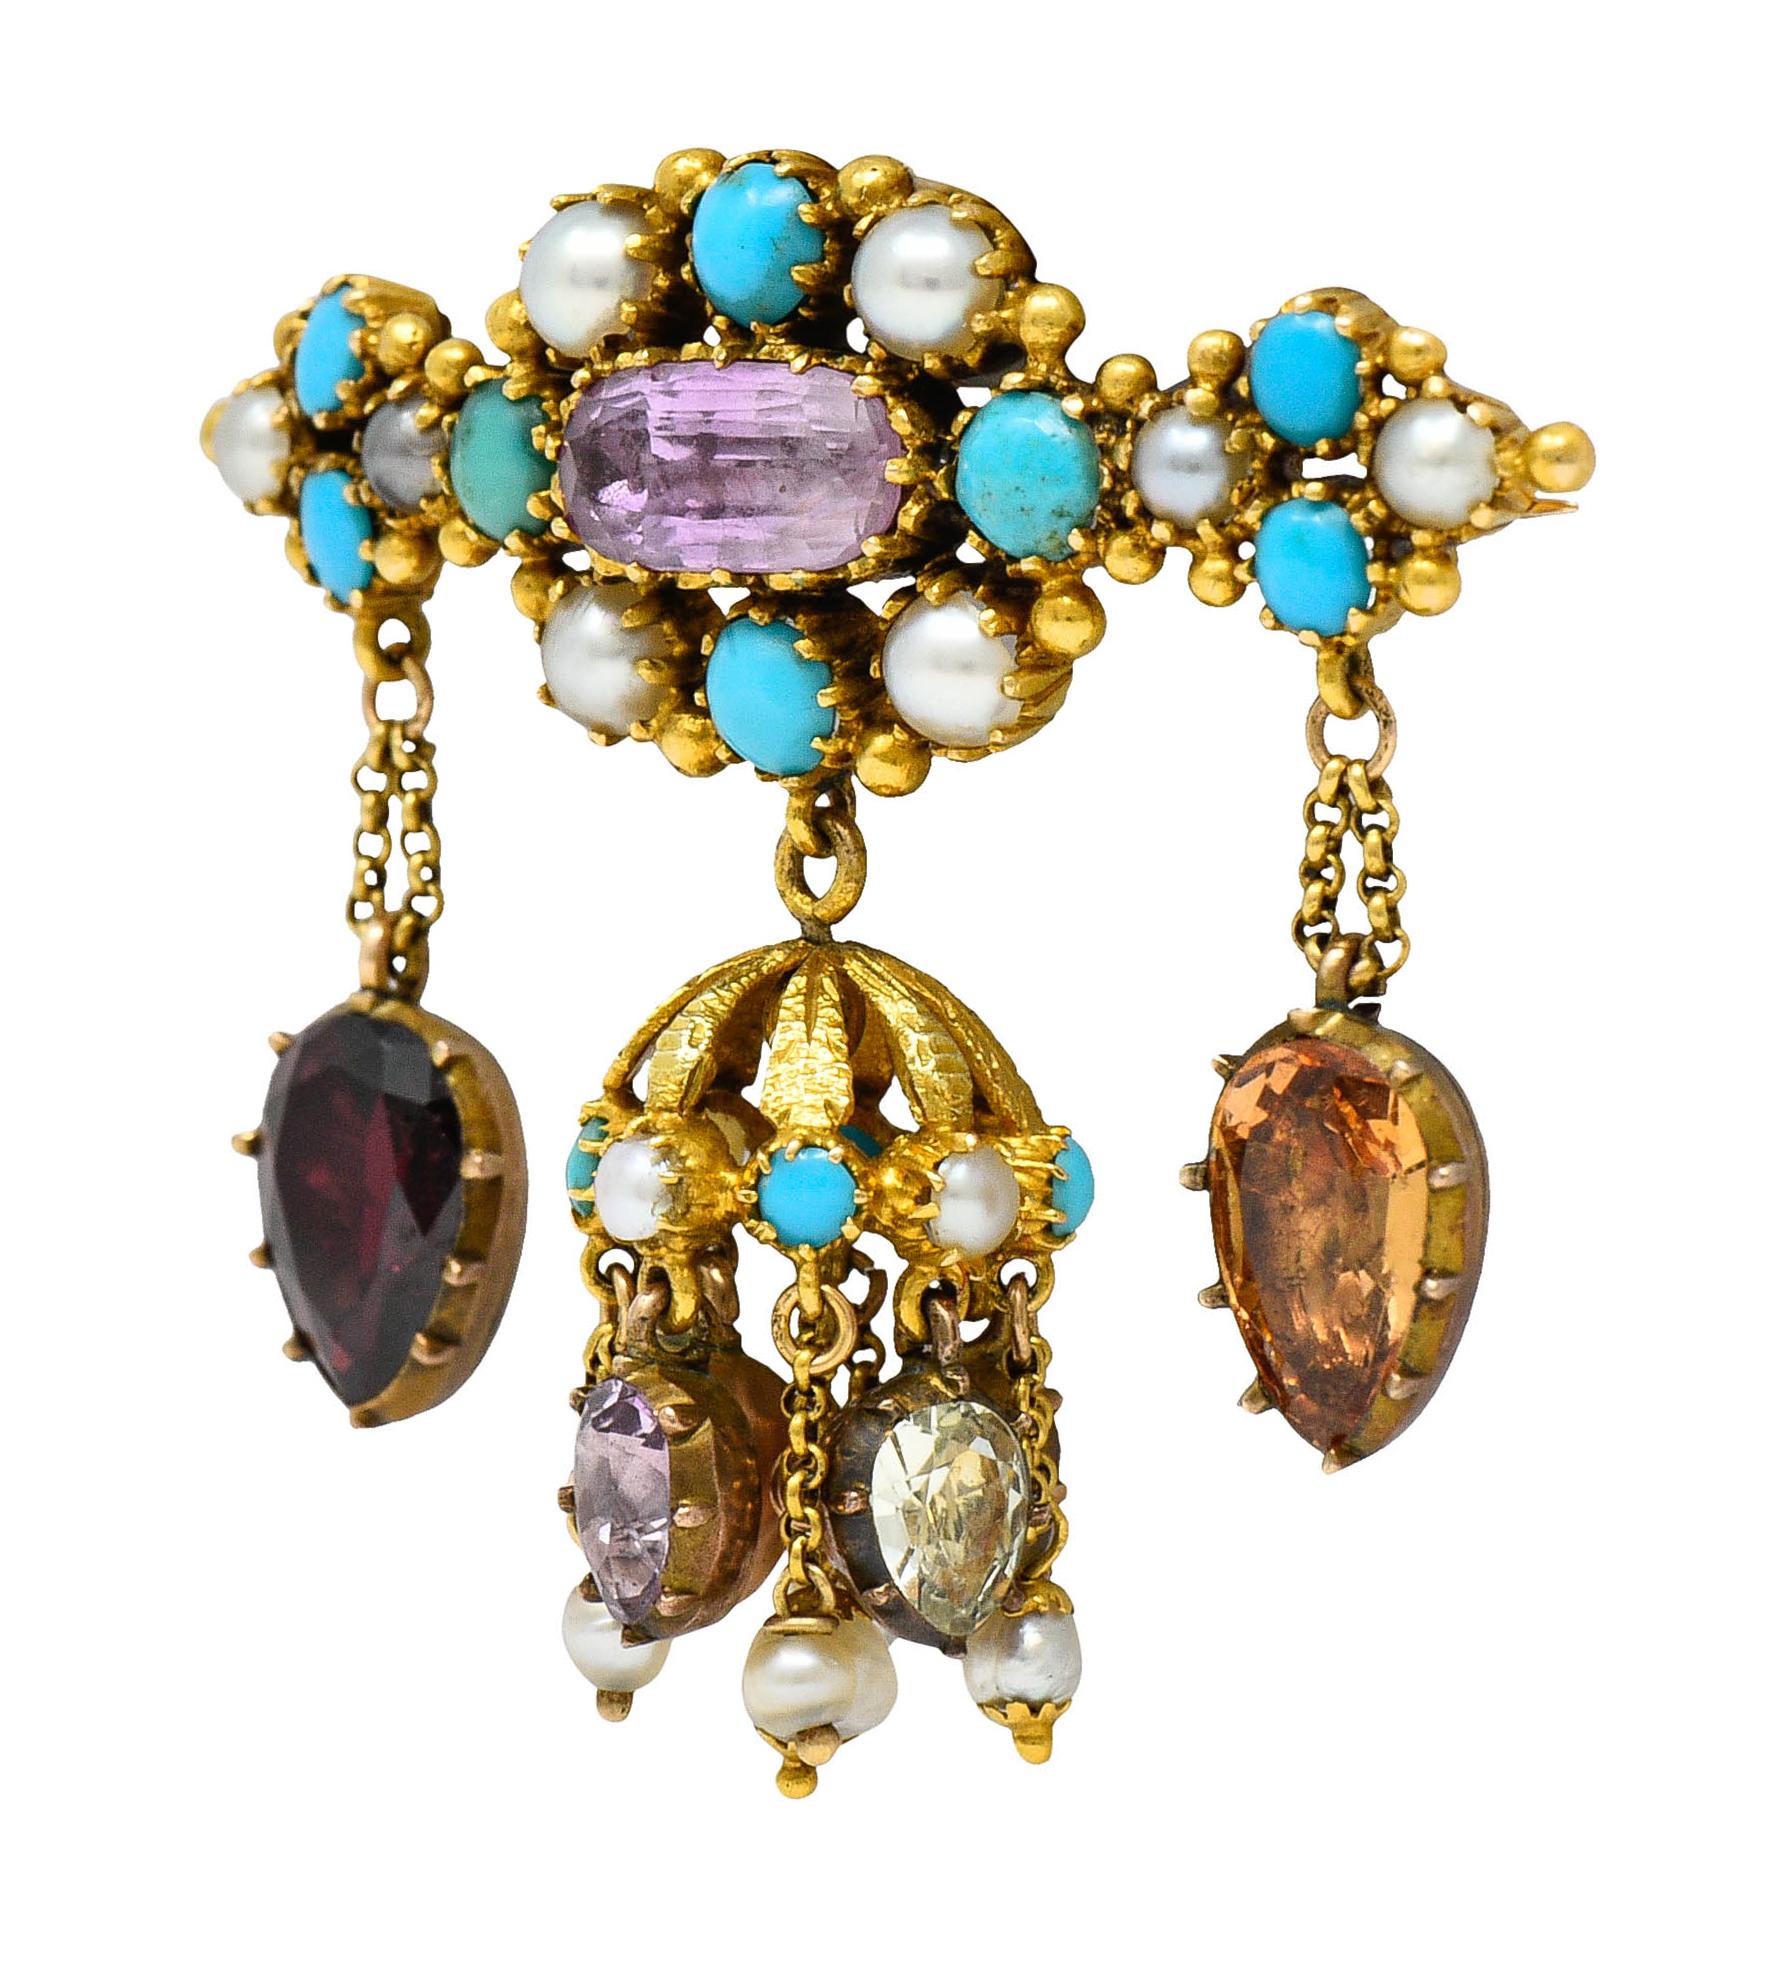 East/West brooch features an elongated cushion cut topaz

Measuring approximately 10.1 x 4.8 mm with medium light pinkish lavender color - foil backed

Surrounded by round button pearls and round turquoise cabochons

Varied in color and luster while